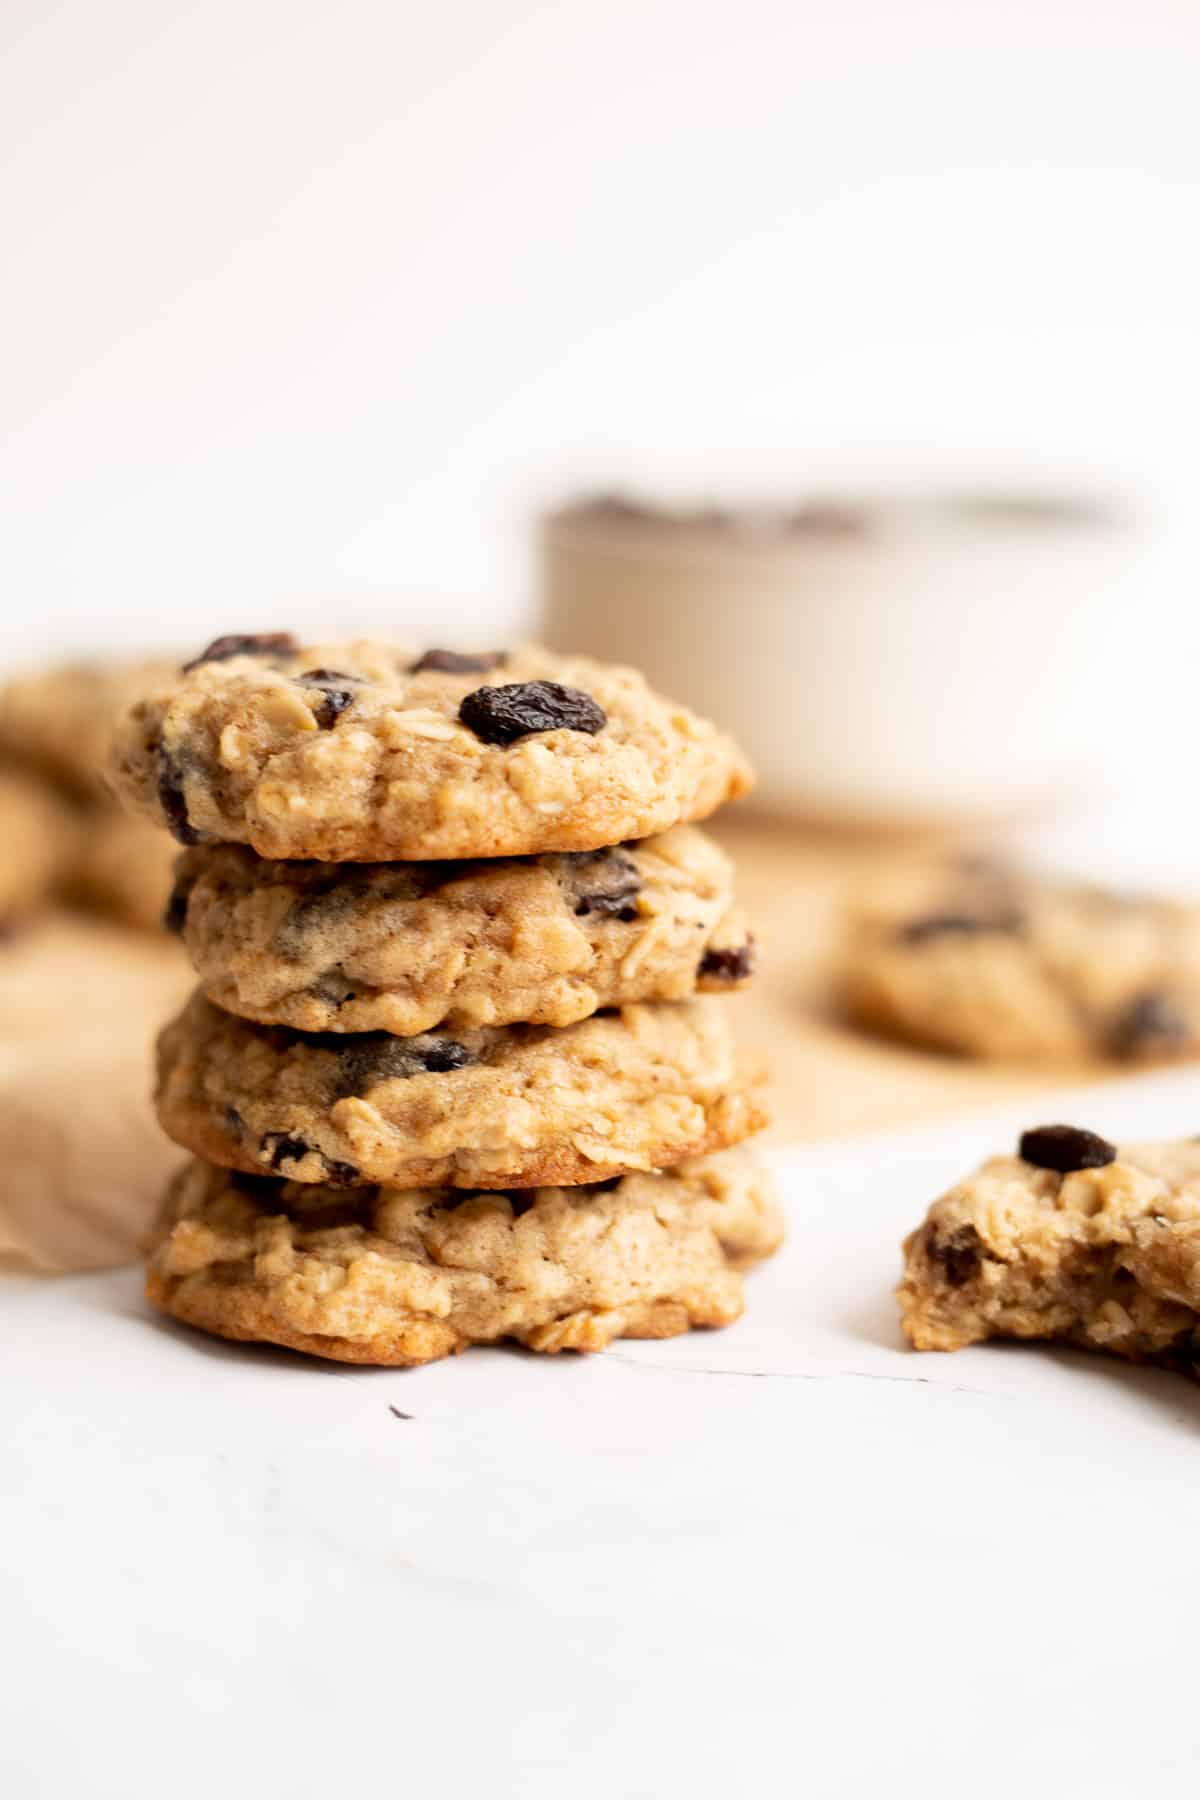 stack of 4 vegan oatmeal cookies on white backdrop.